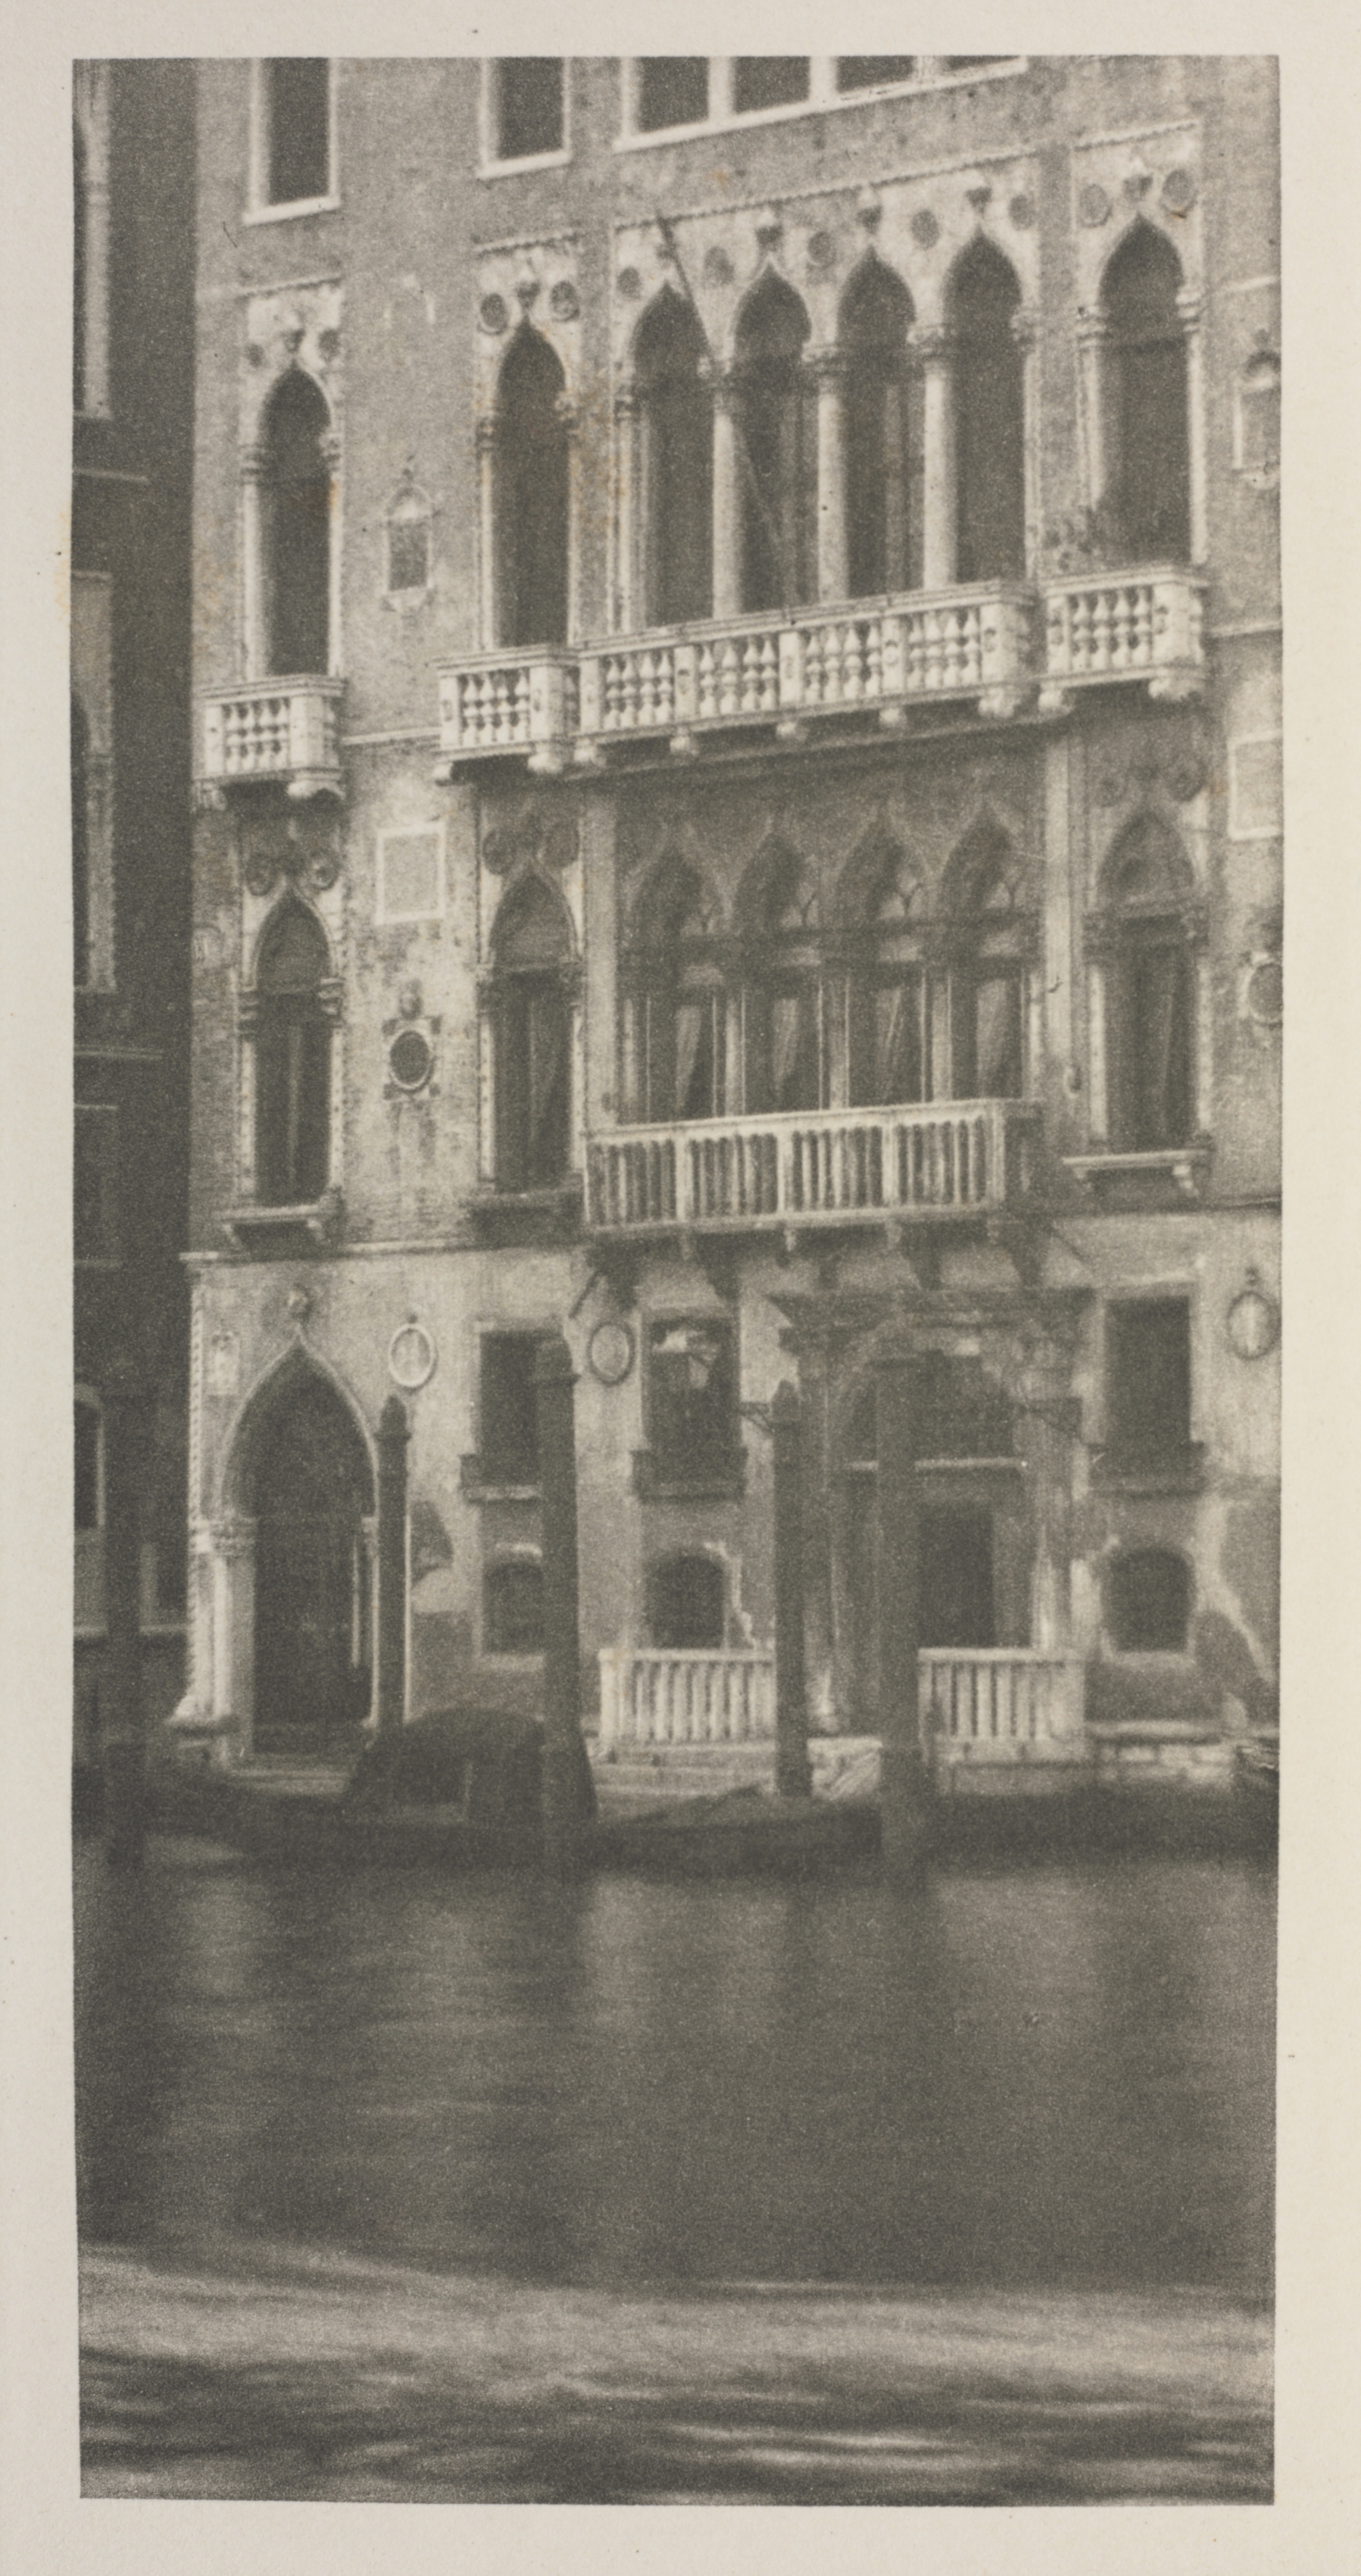 The Novels and Tales, by Henry James: The Venetian Palace